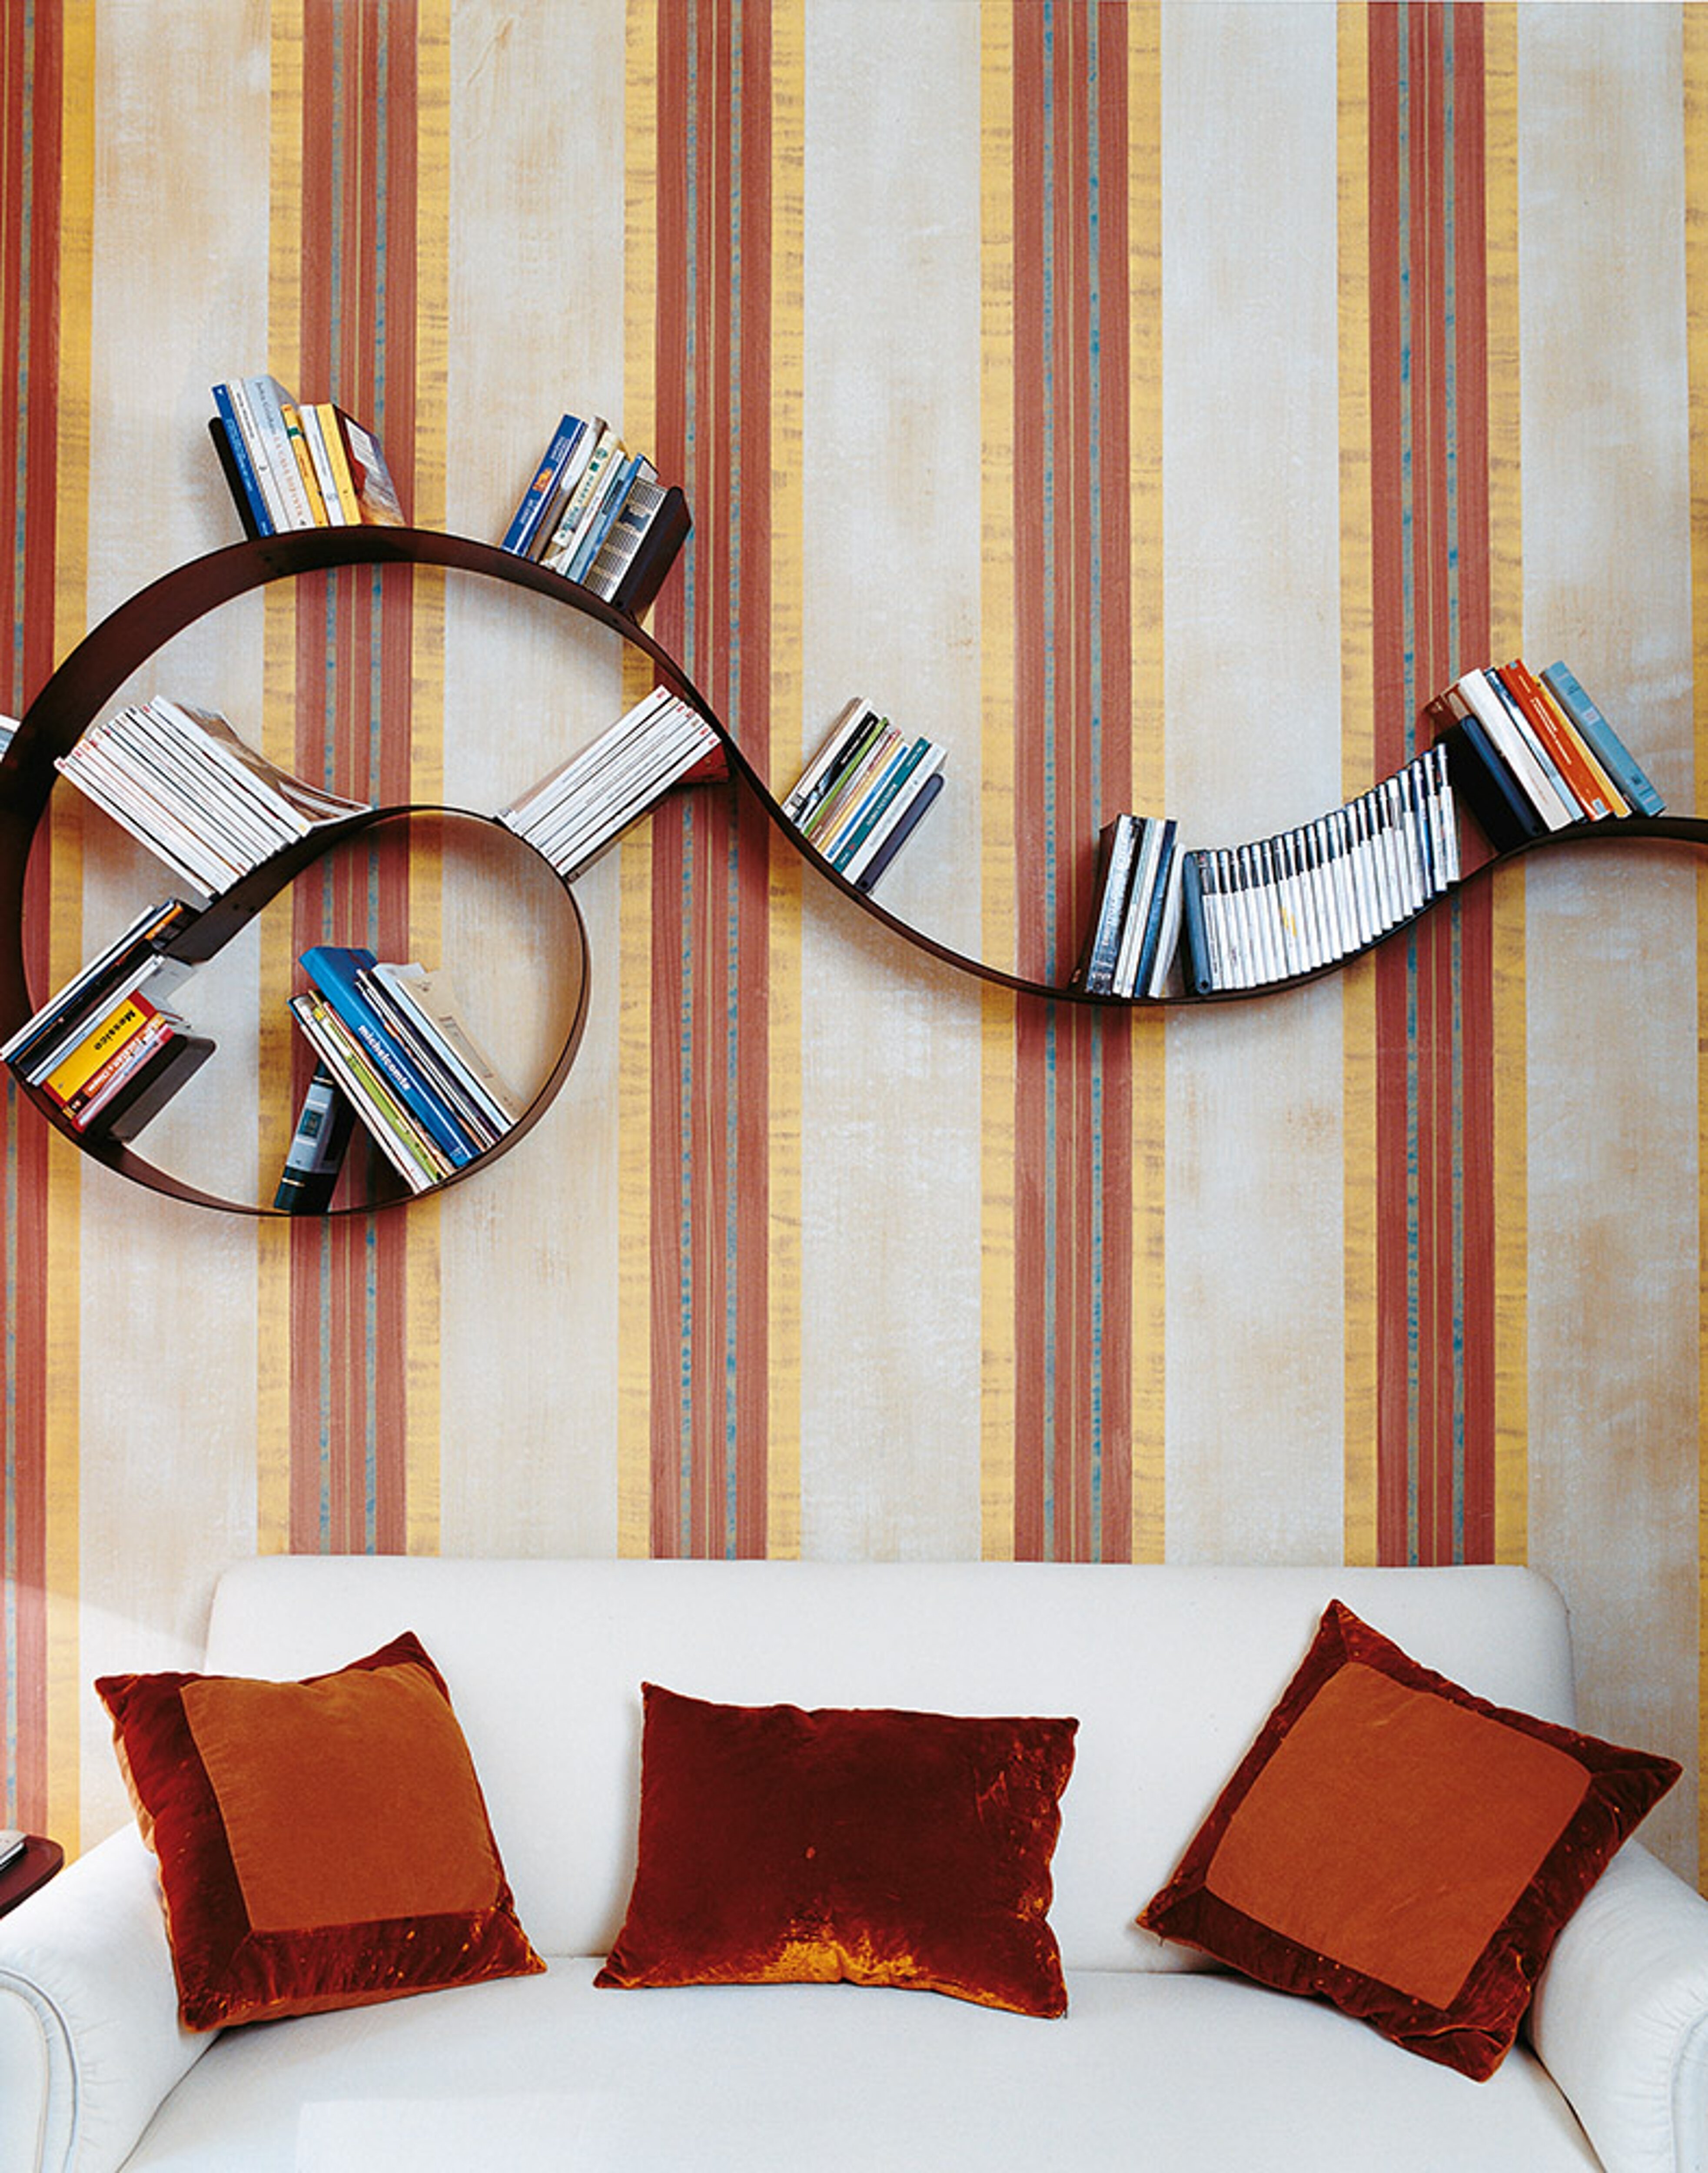 Kartell Bookworm Adjustable Wall-Mounted Bookshelf by Ron Arad & Reviews